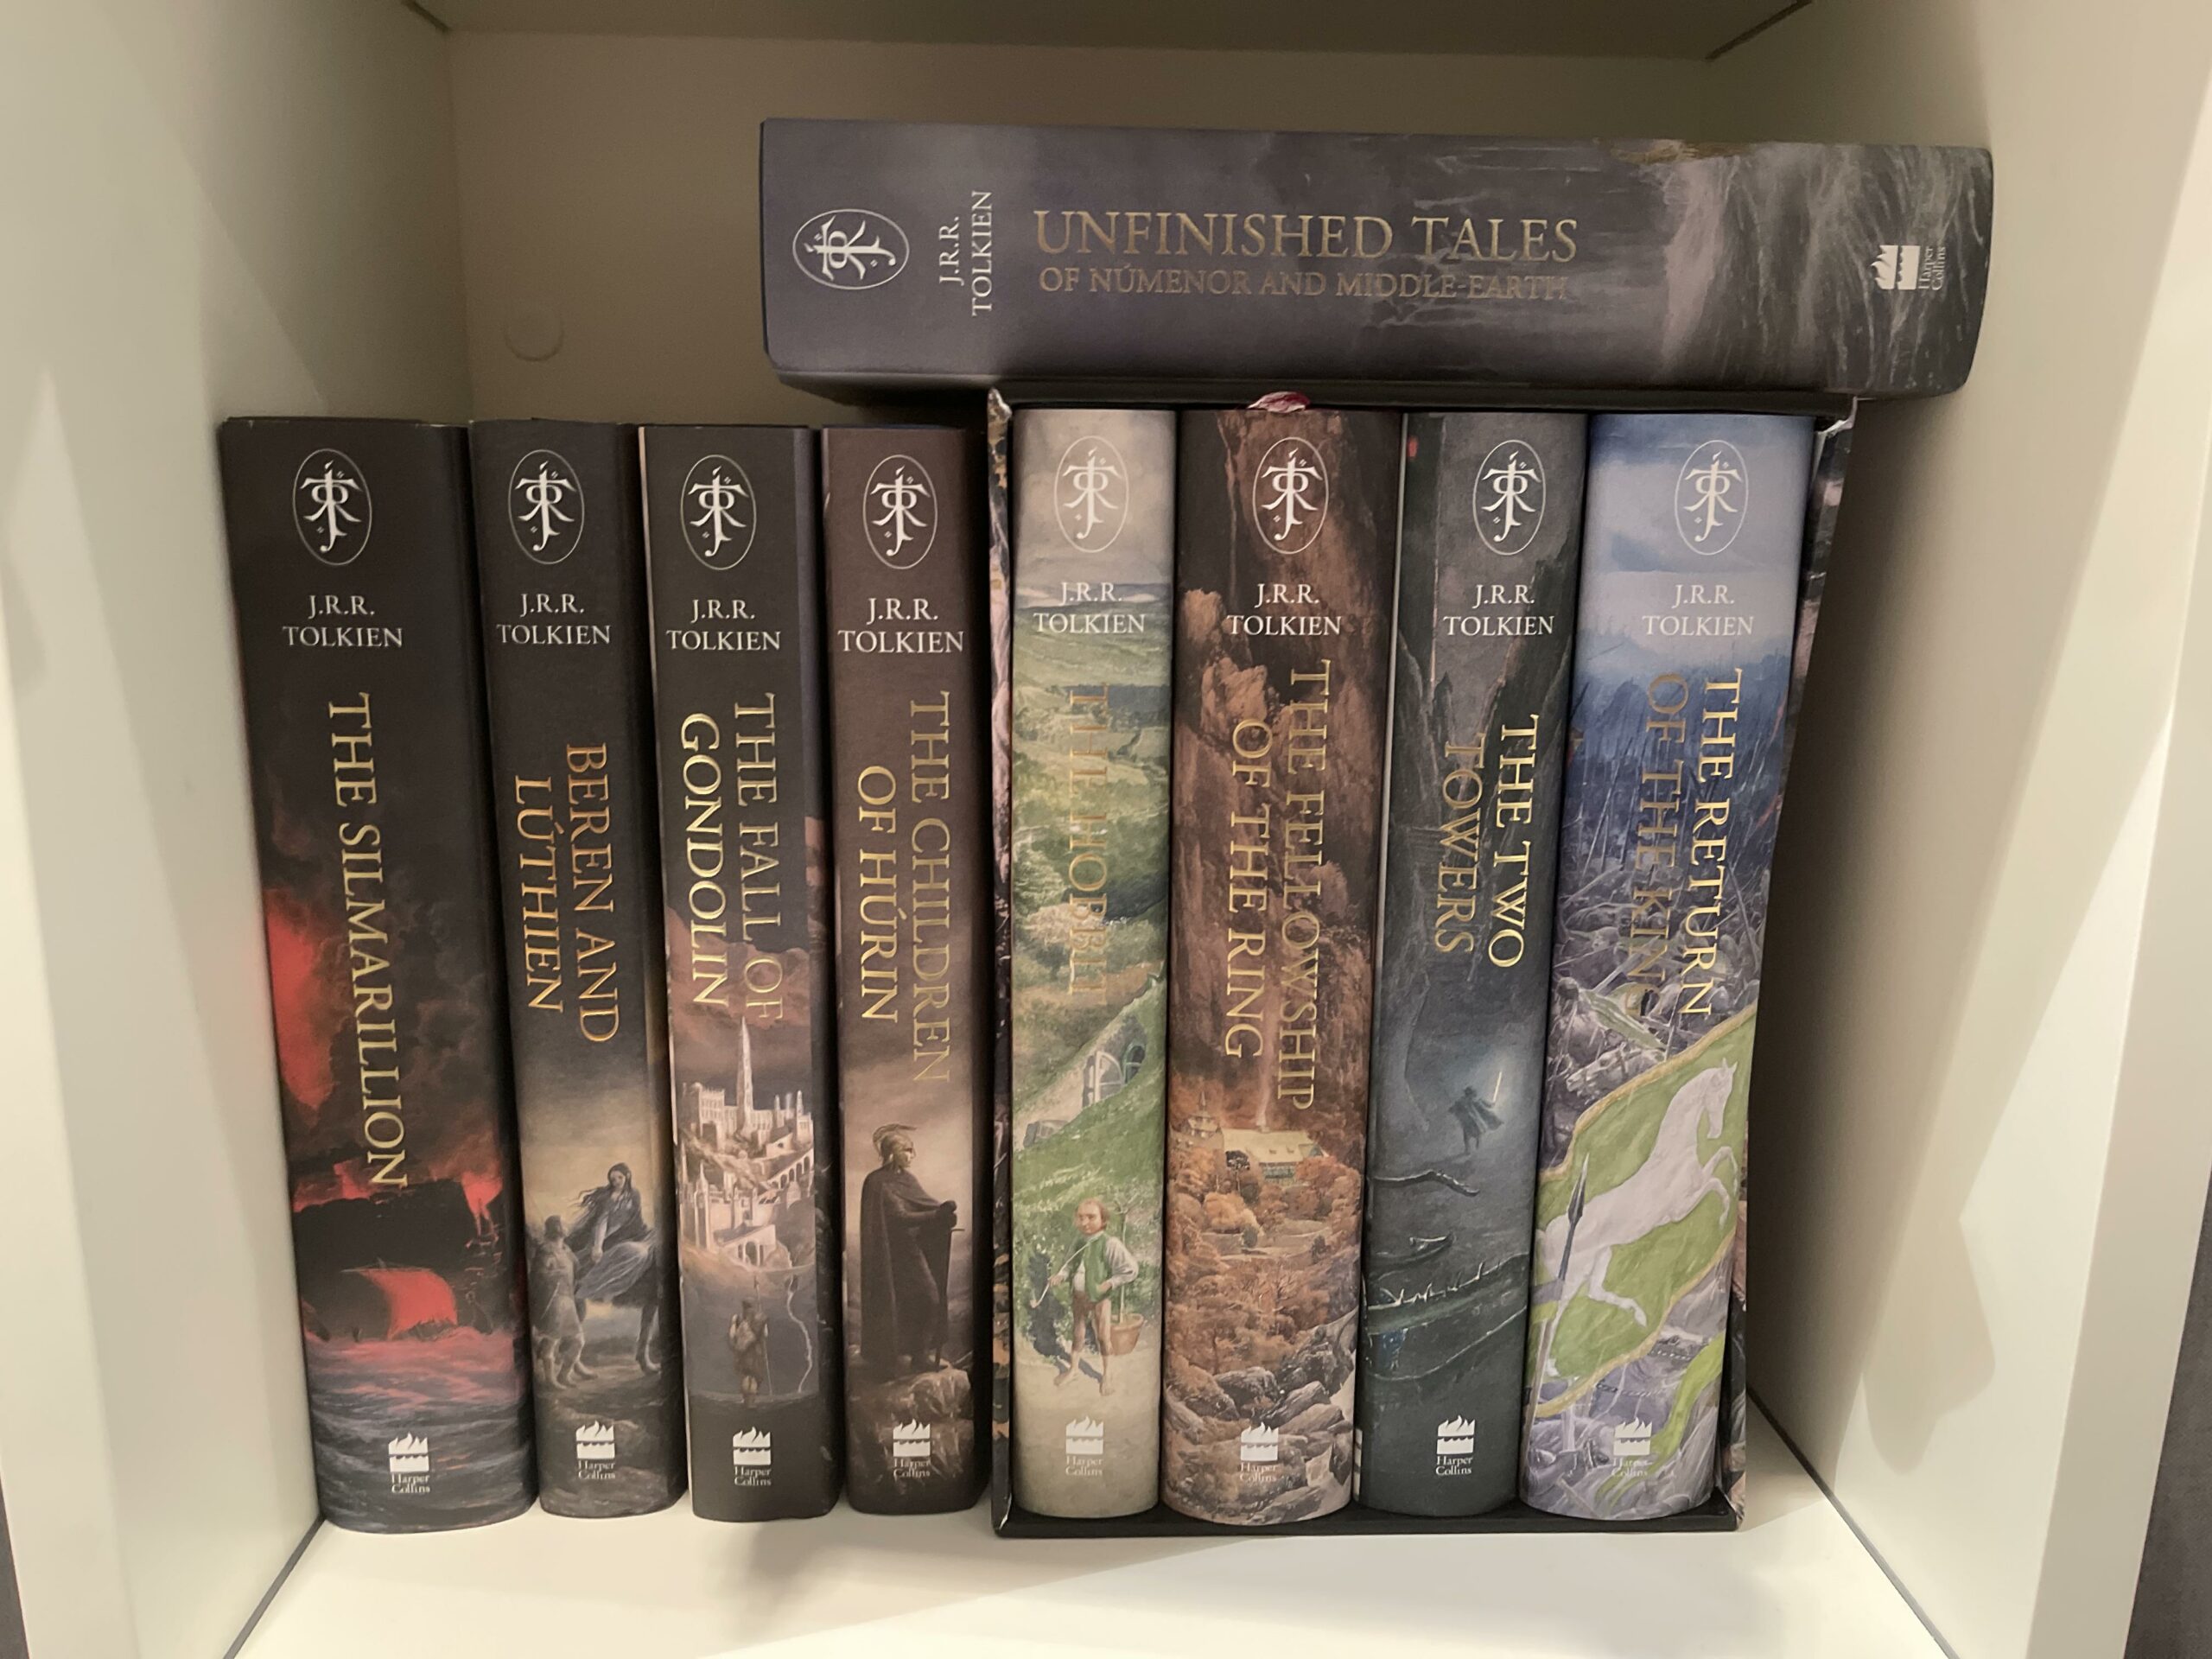 Just finished reading the Hobbit - what order should I read the rest ...